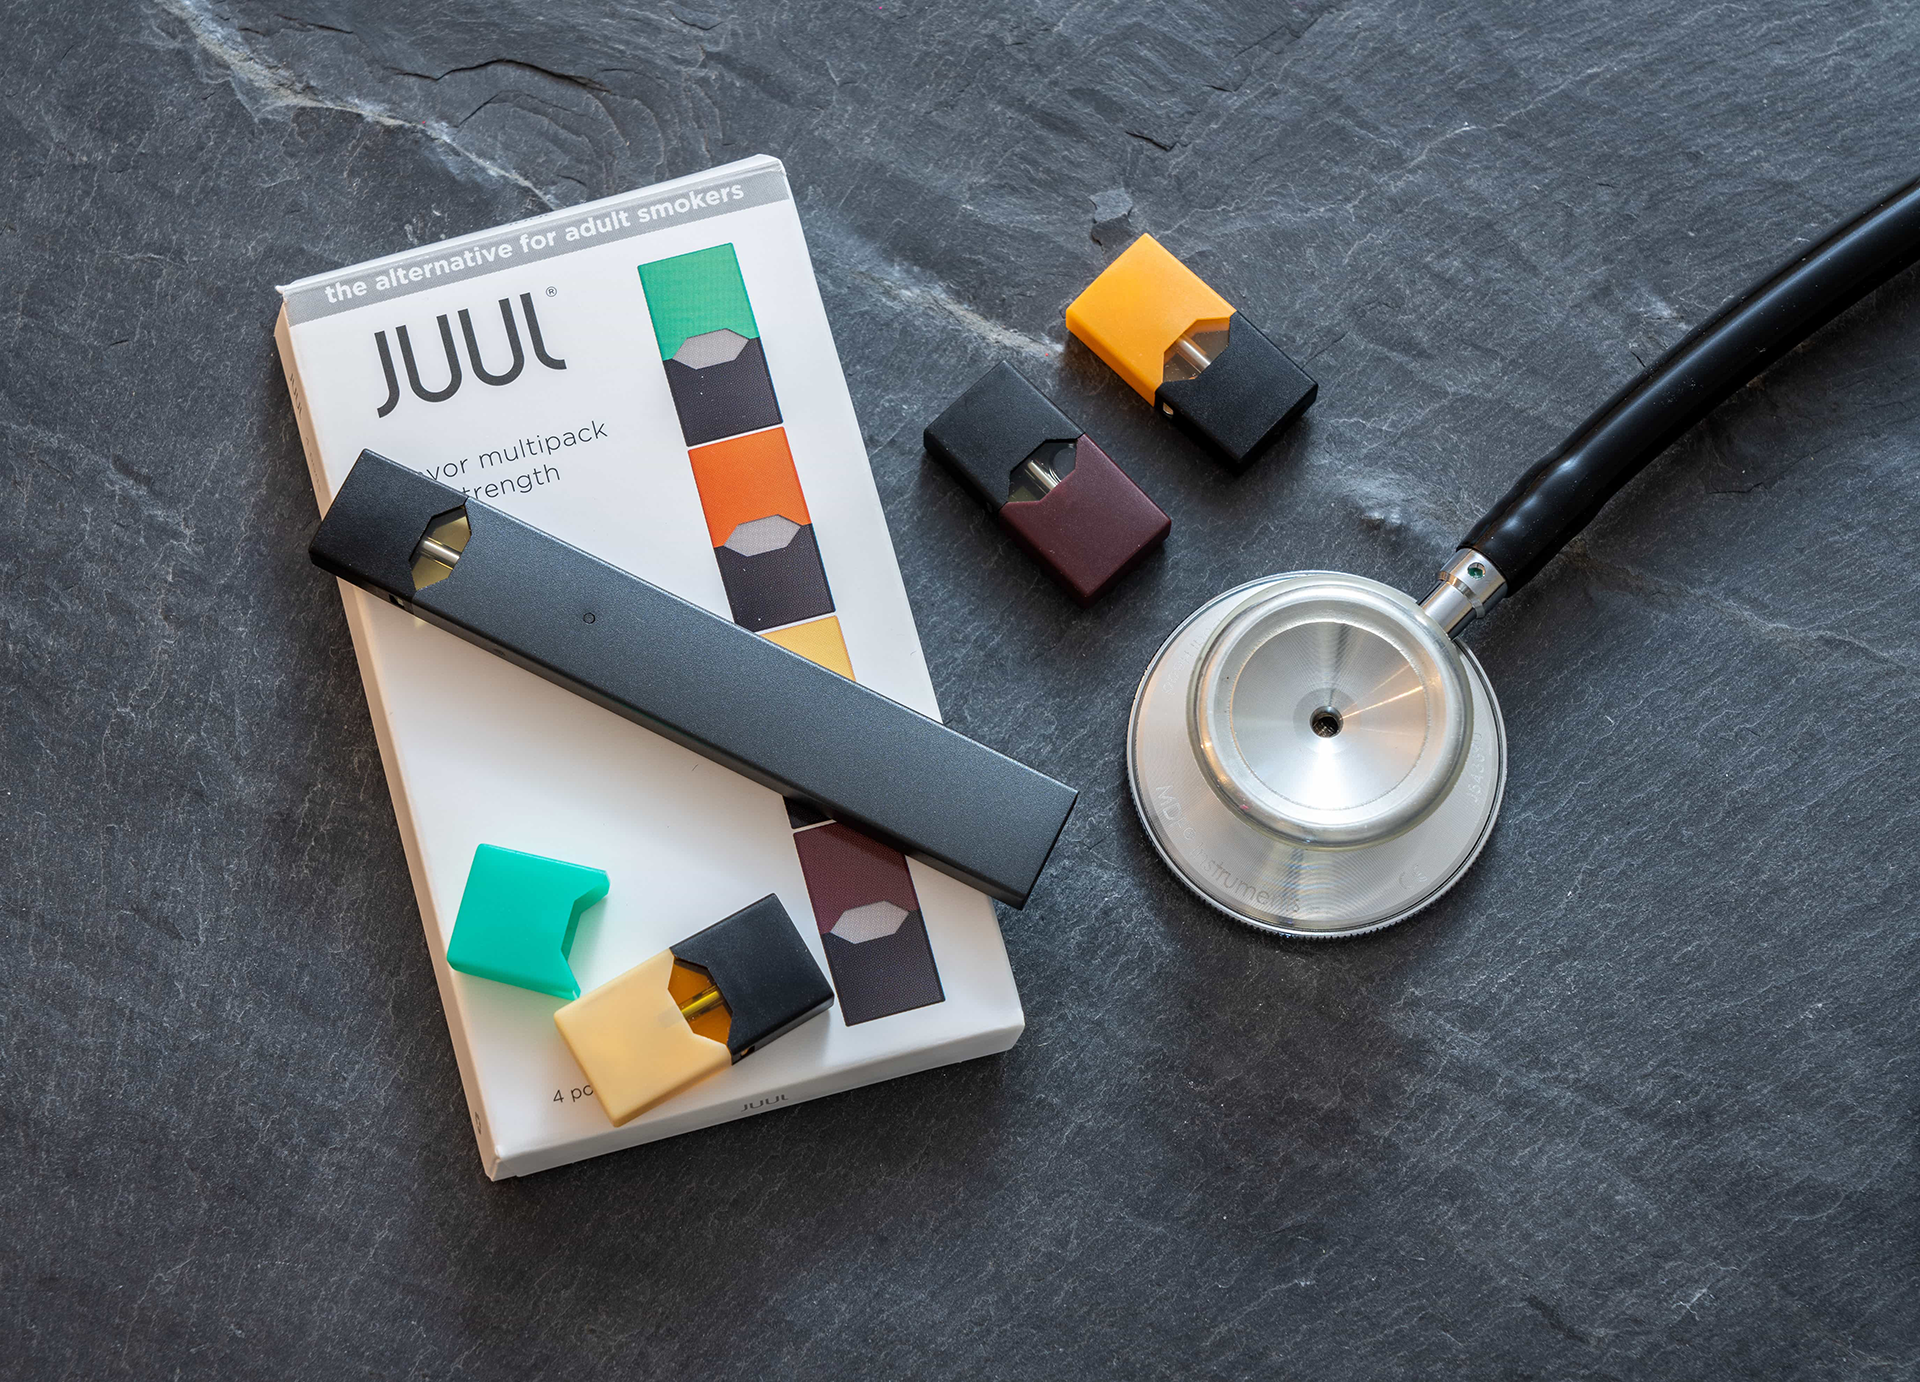 JUUL vaping devices